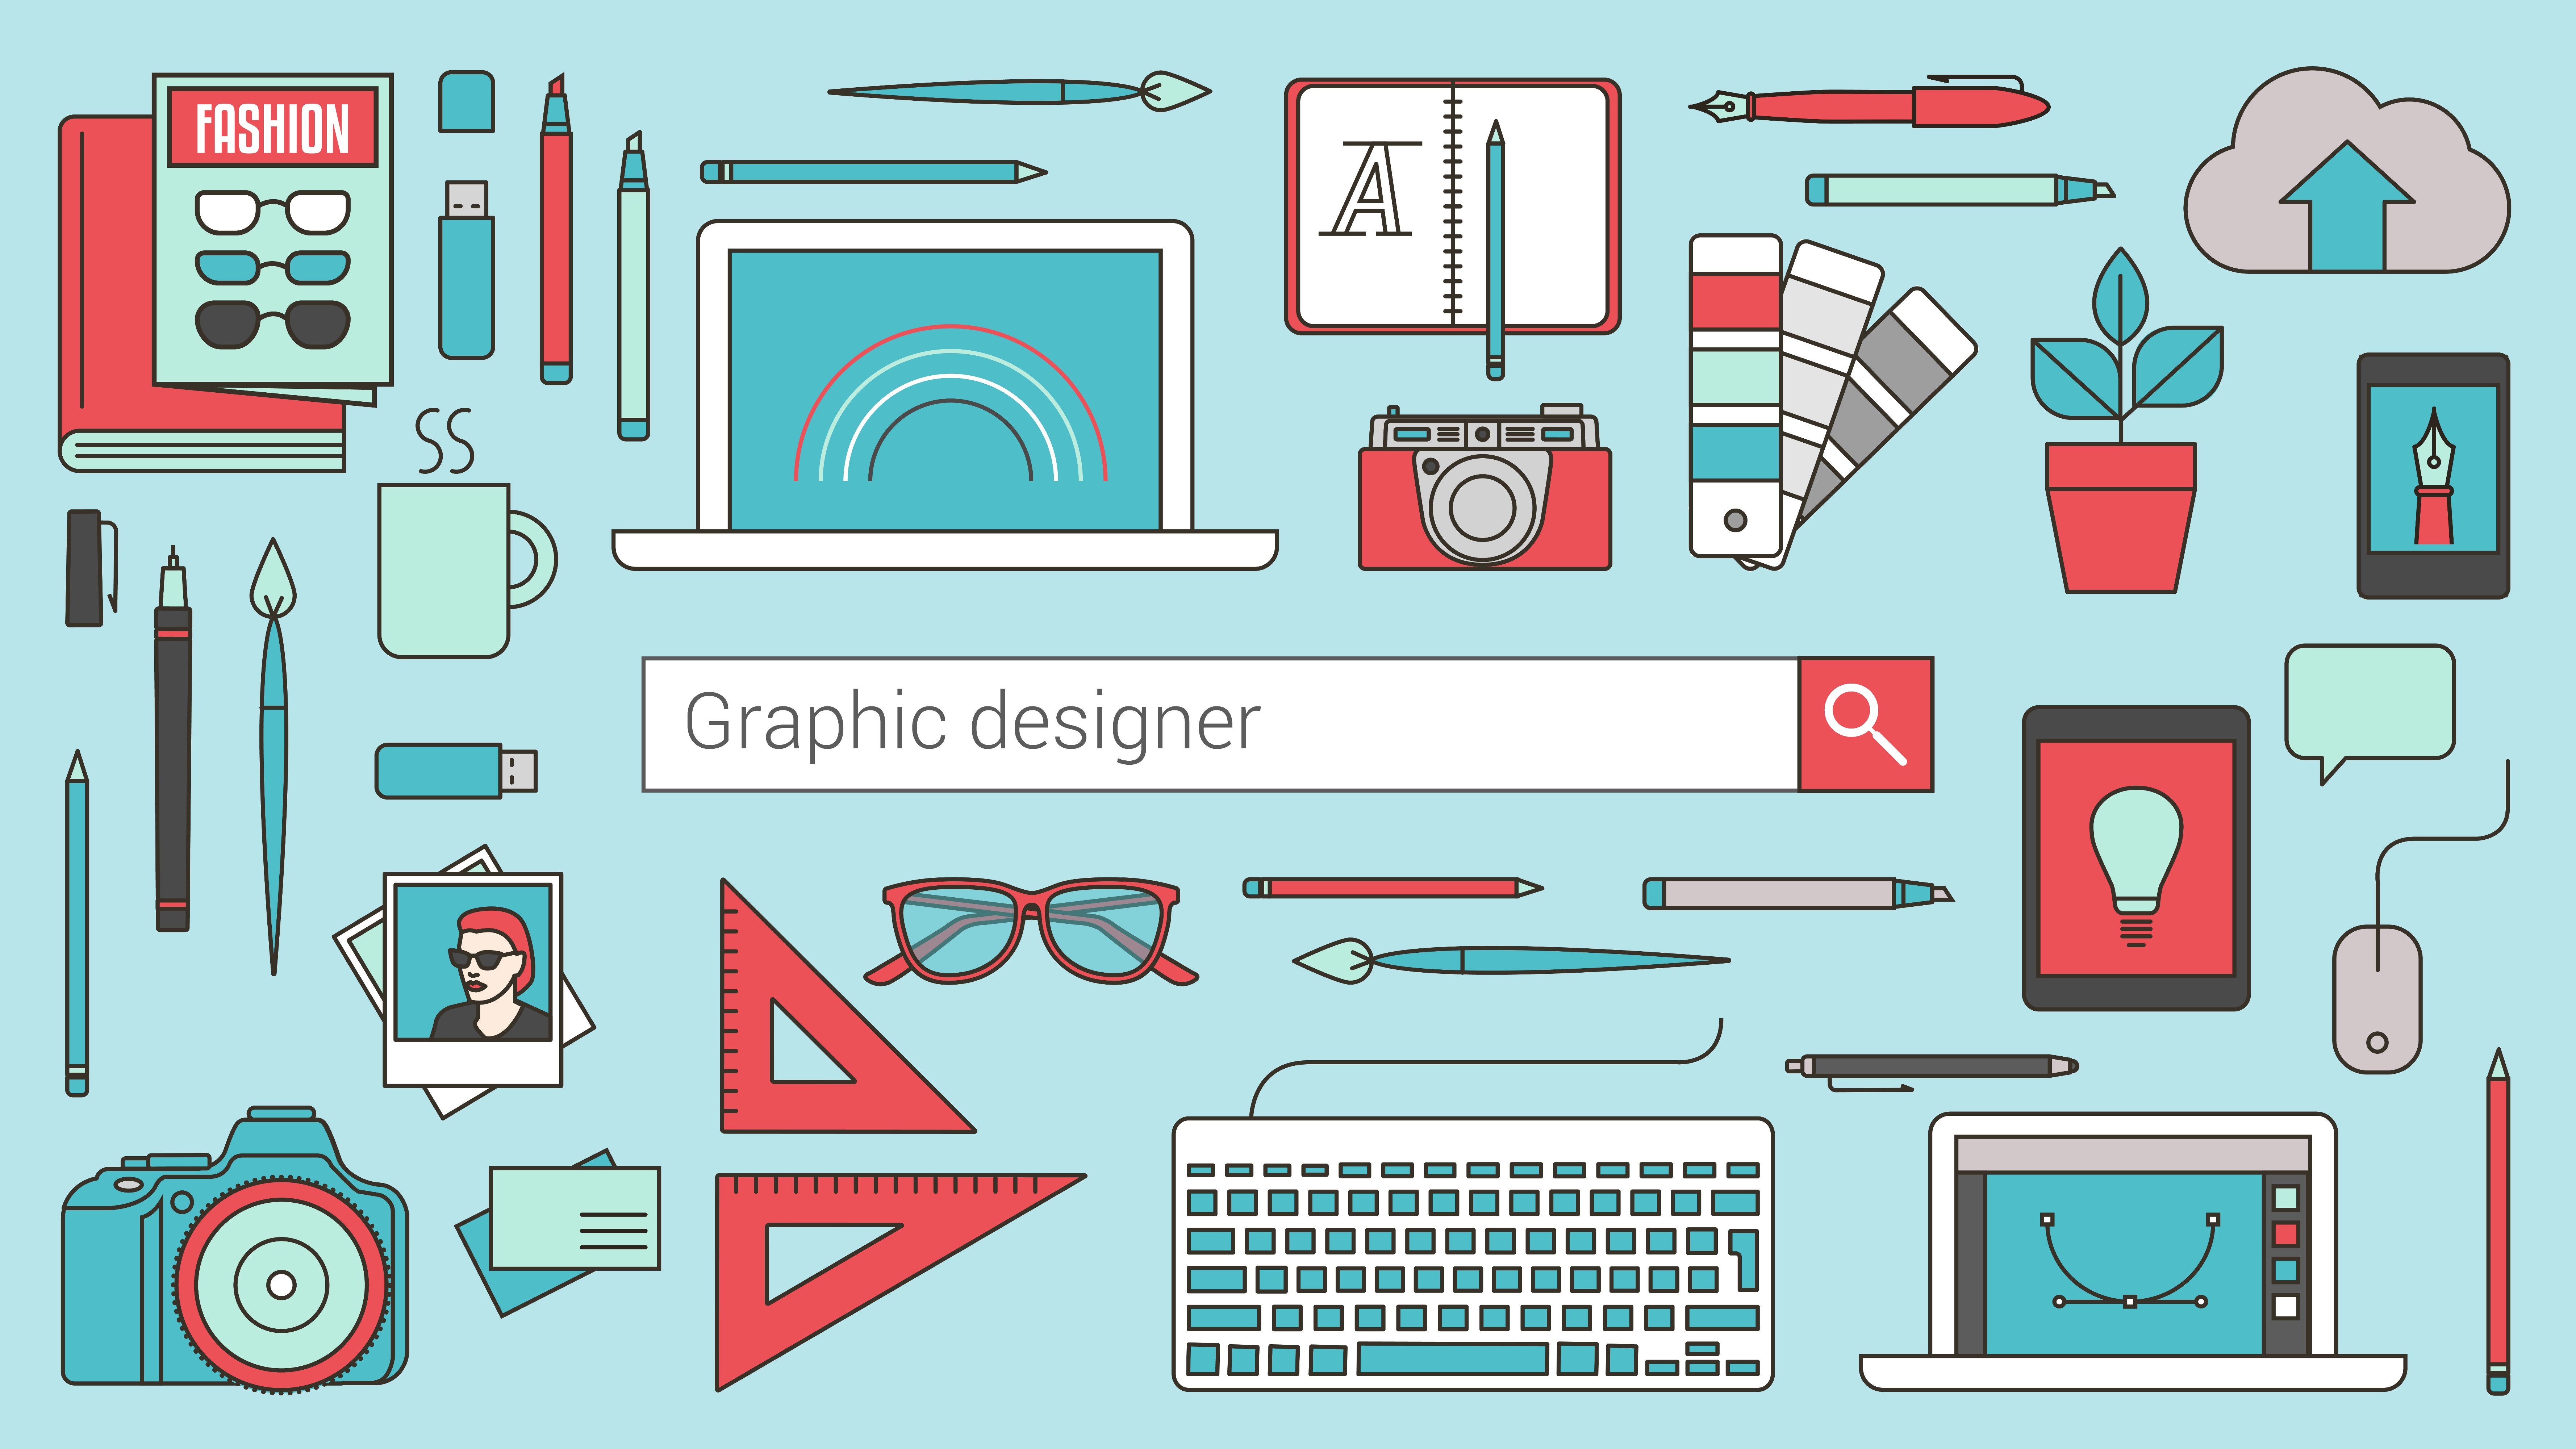 How to interact with your new graphic designer